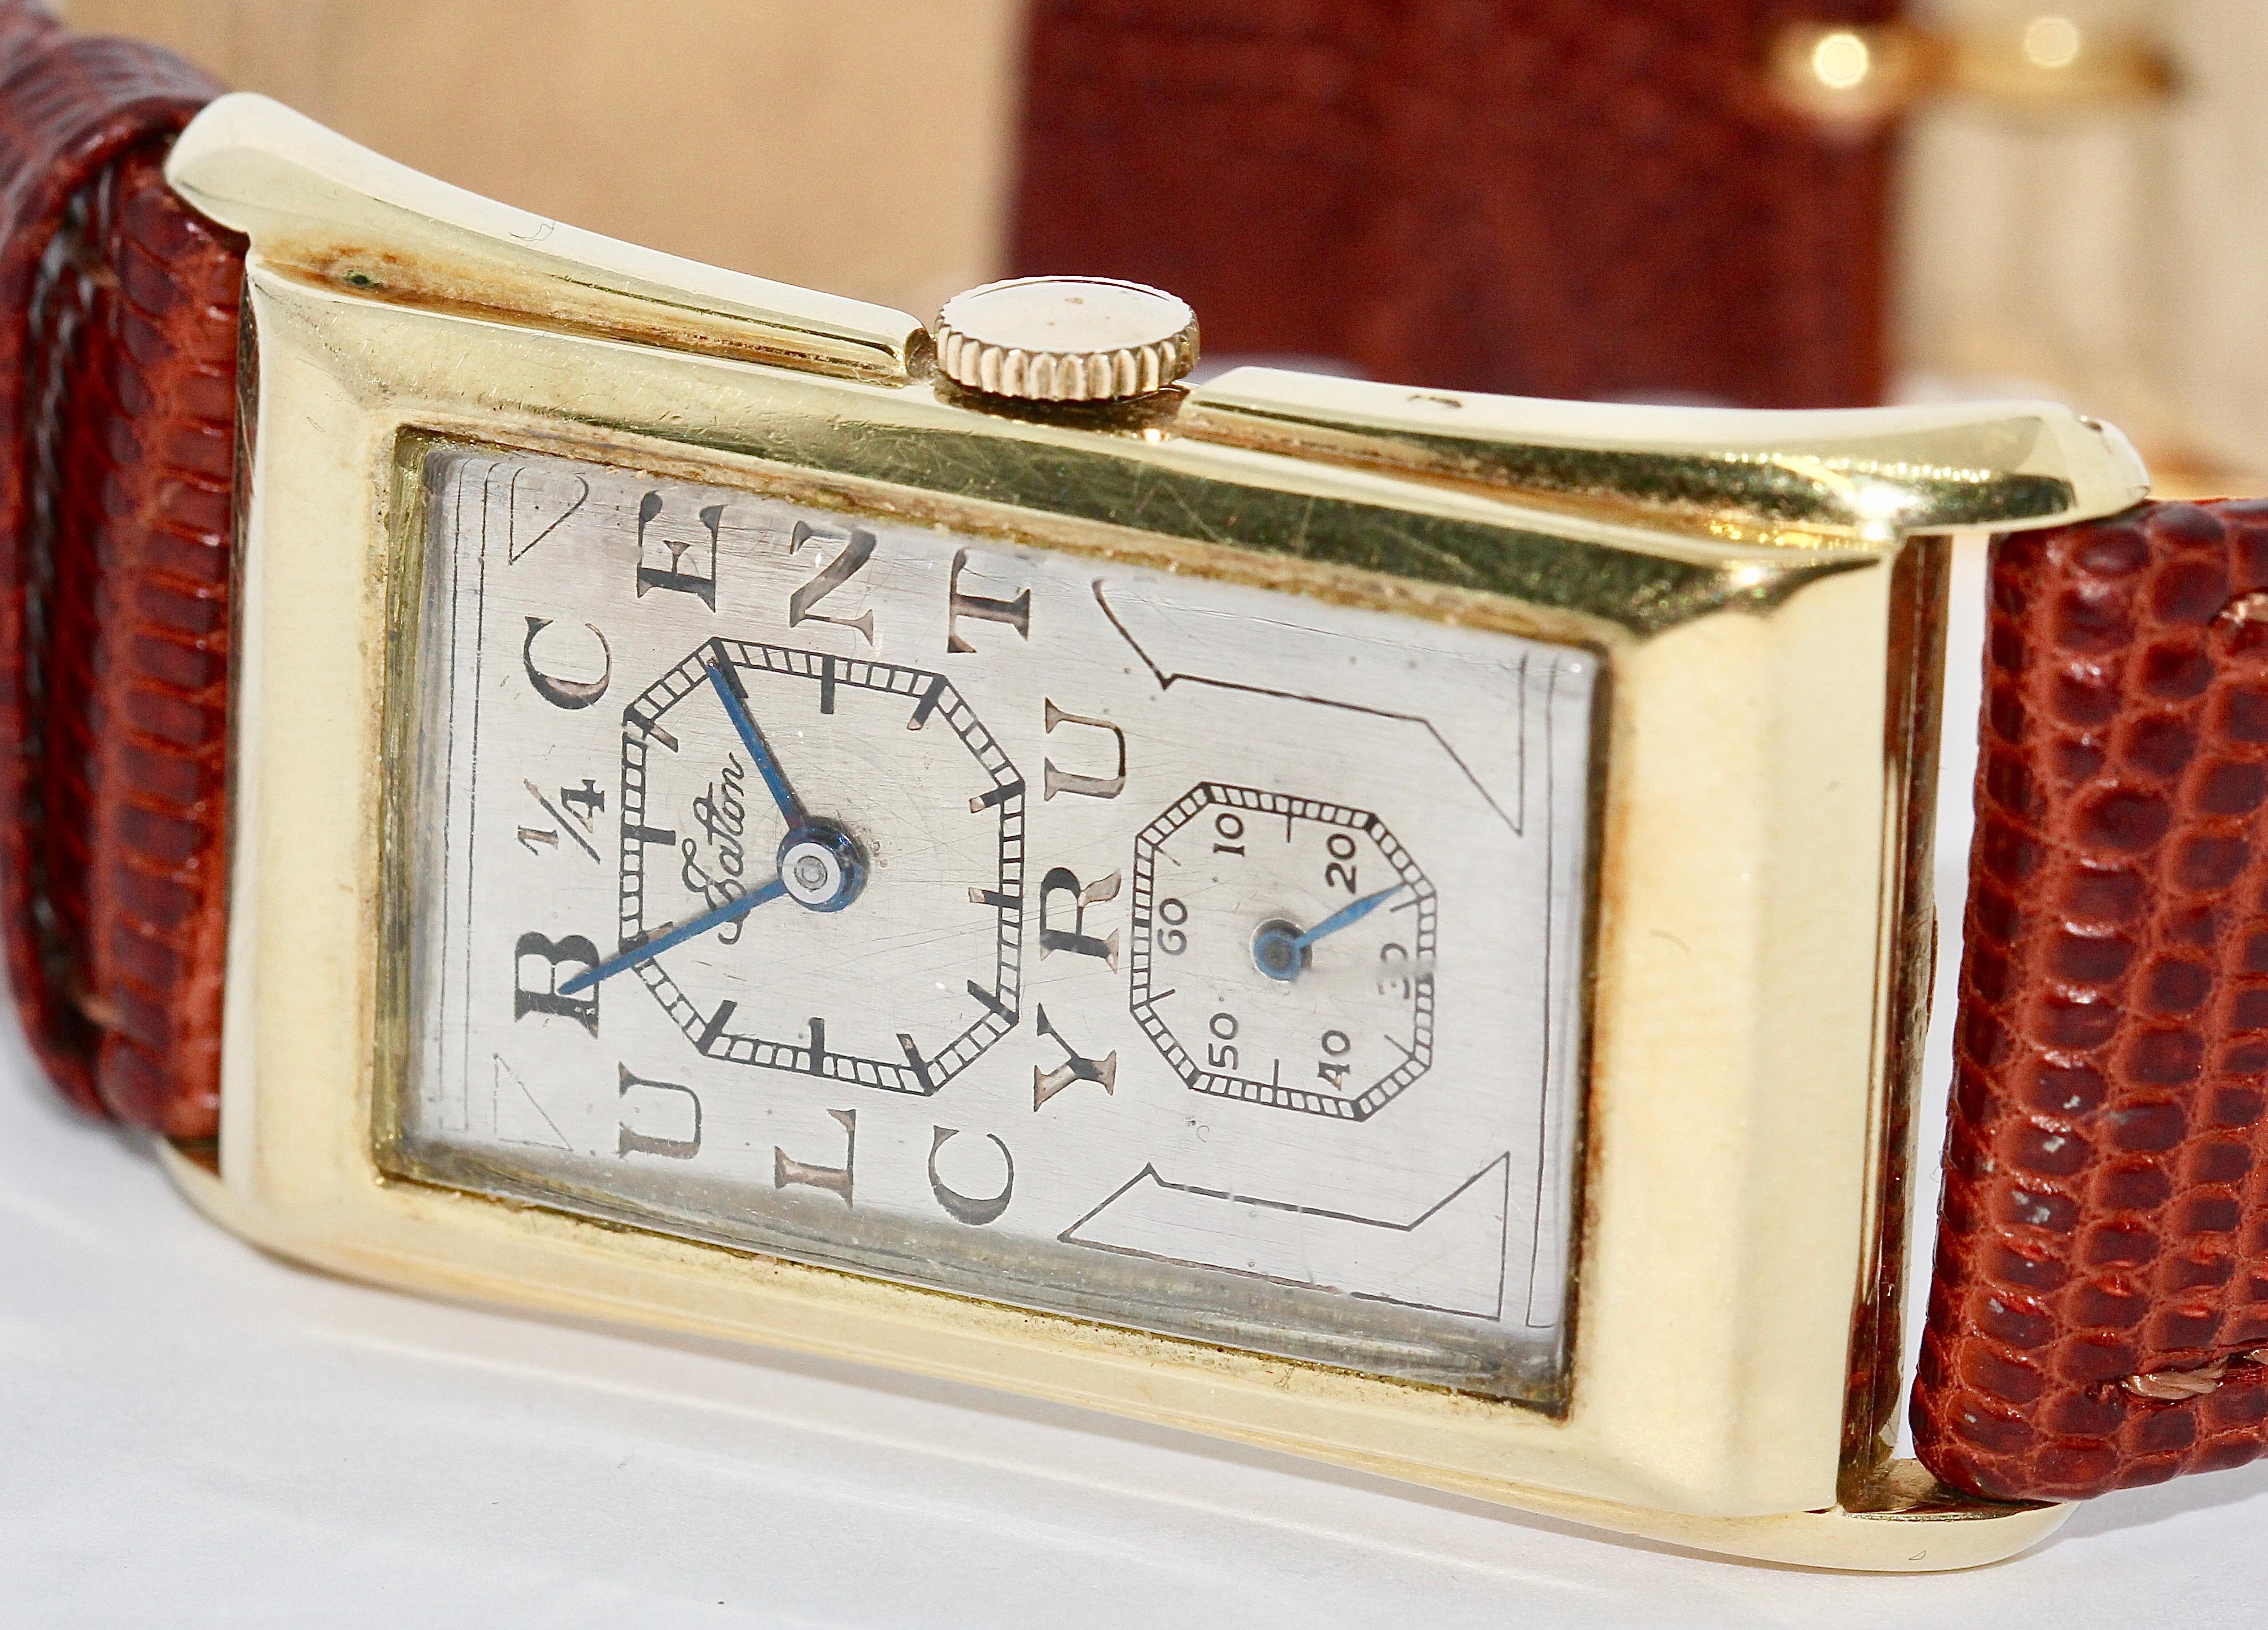 Historic collector's watch. Presented to 